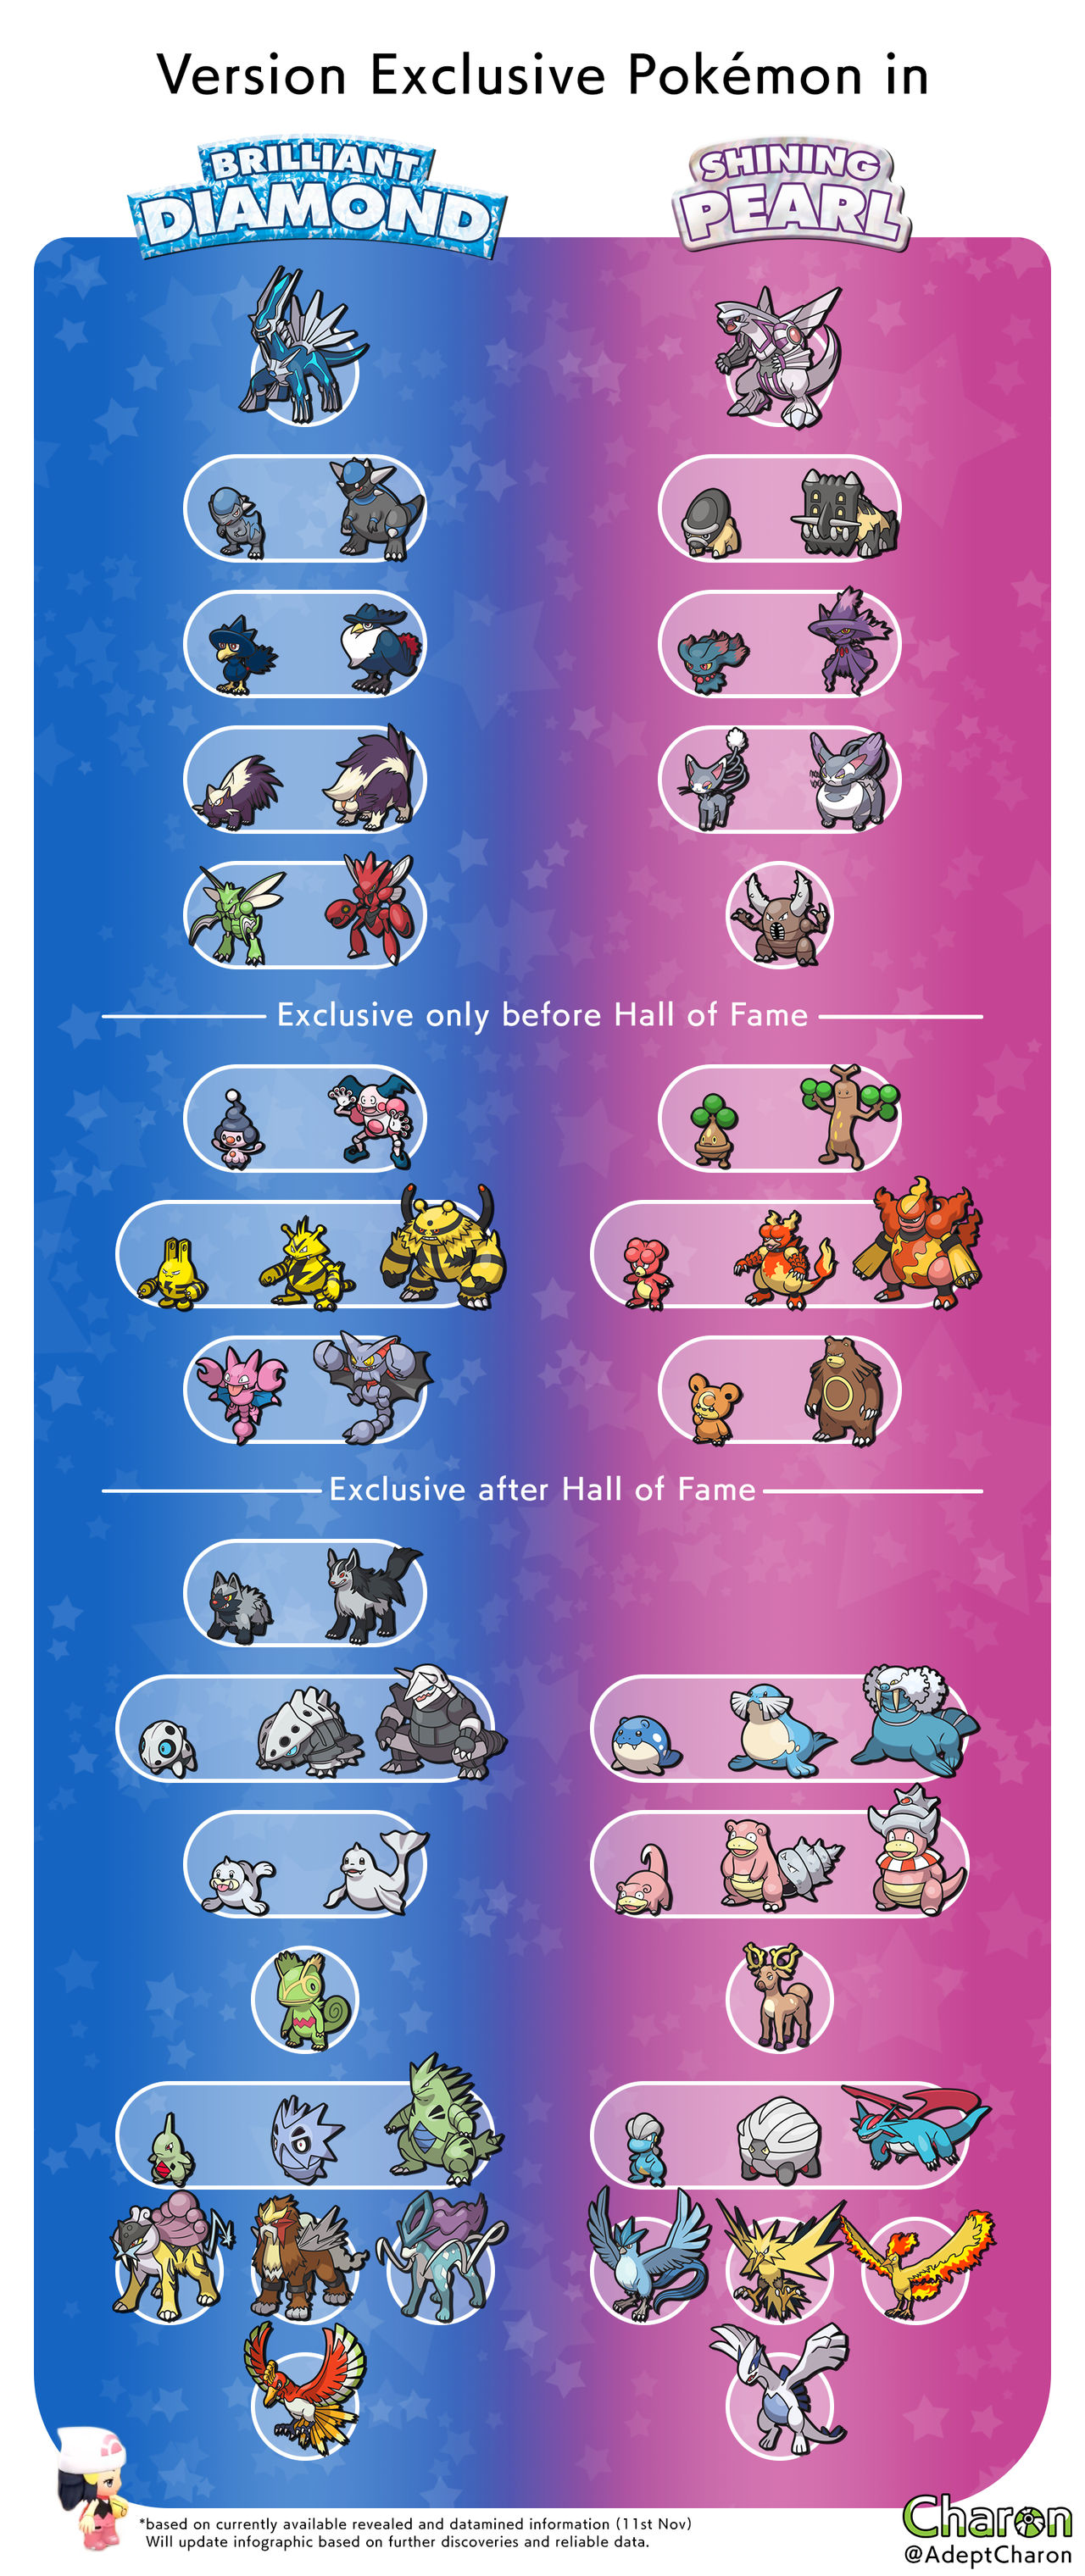 Pokémon Brilliant Diamond and Shining Pearl: Version Exclusives and  Differences